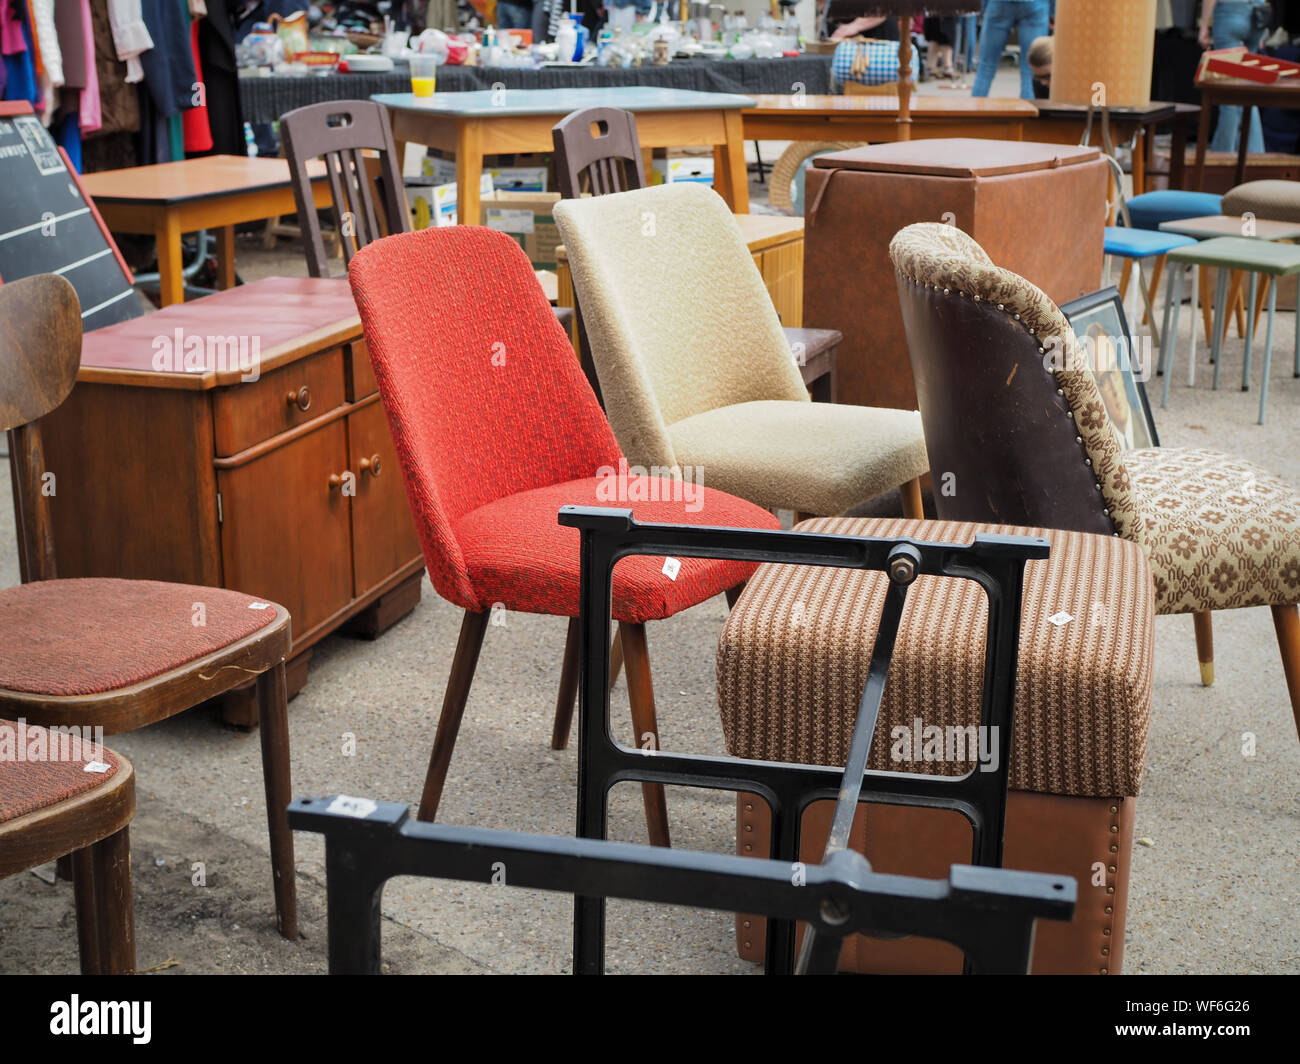 Furniture Stall Stock Photos Furniture Stall Stock Images Alamy